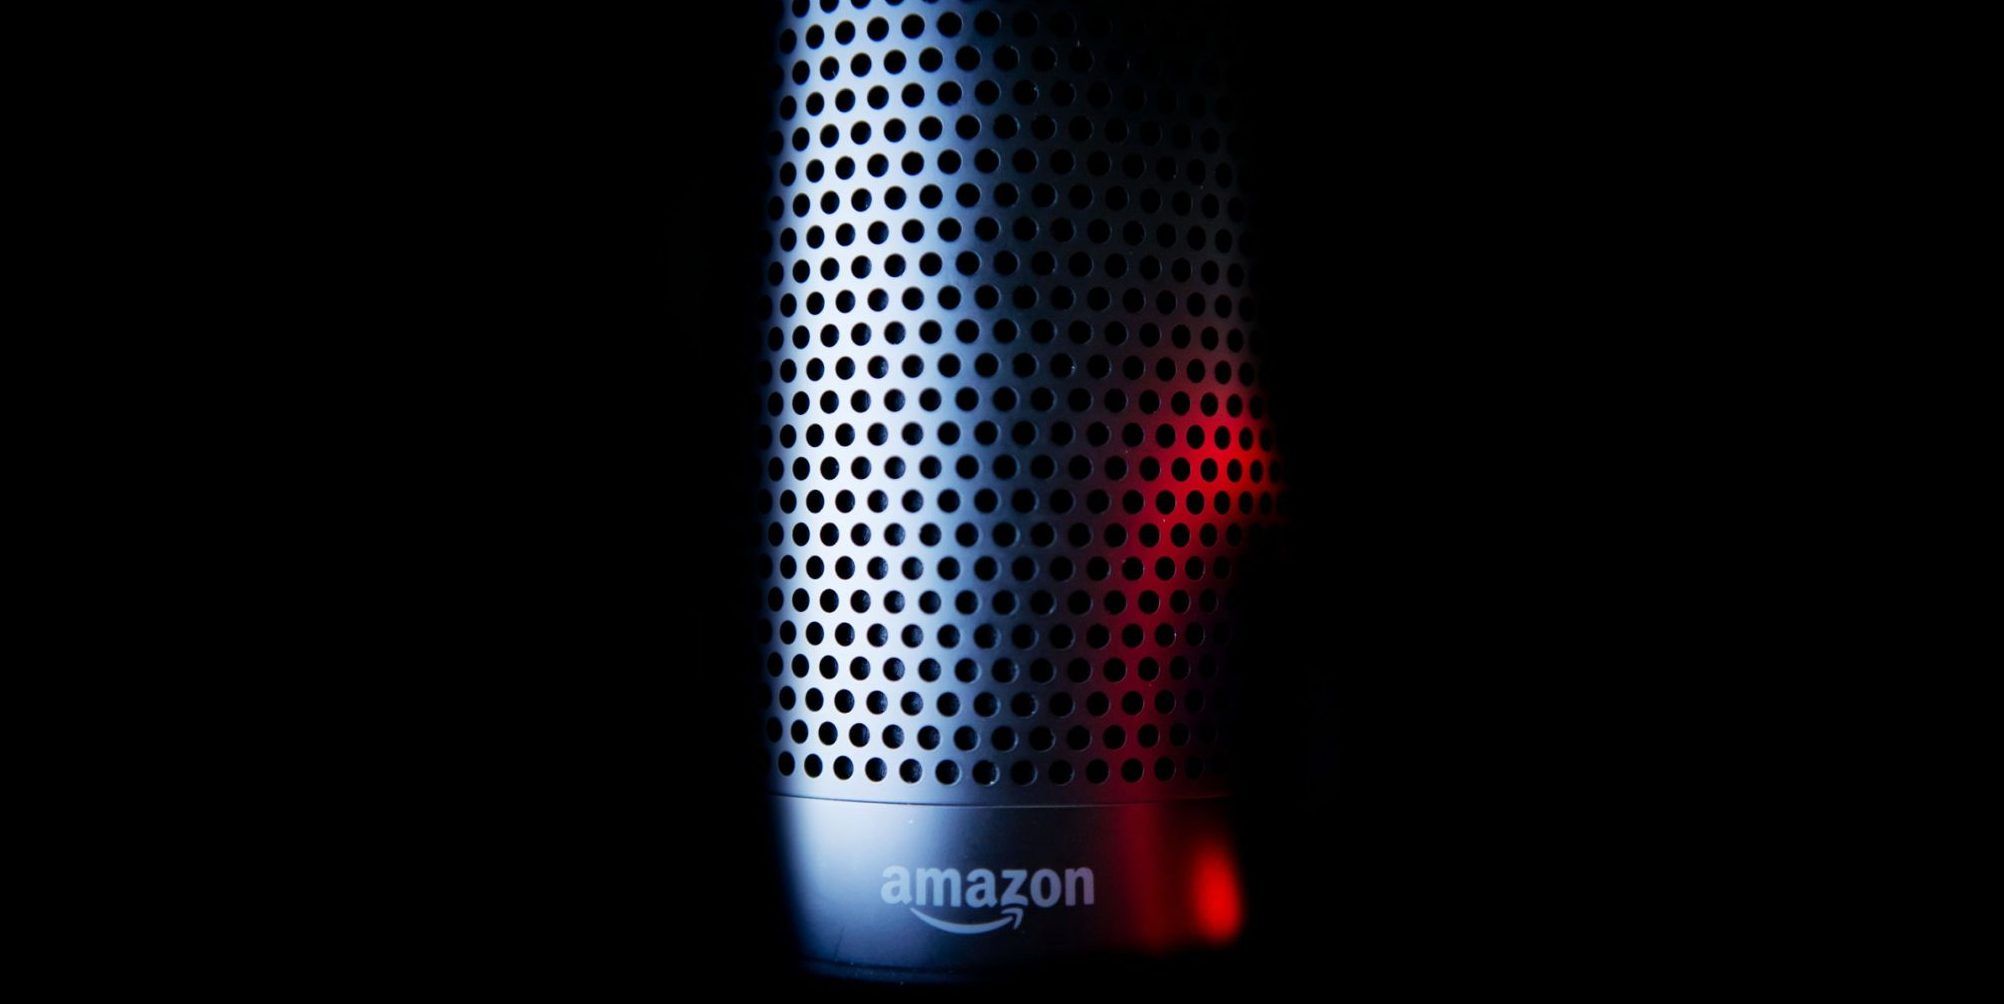 From the Creepy to the Creative, Alexa's Got Skills | ReviewThis